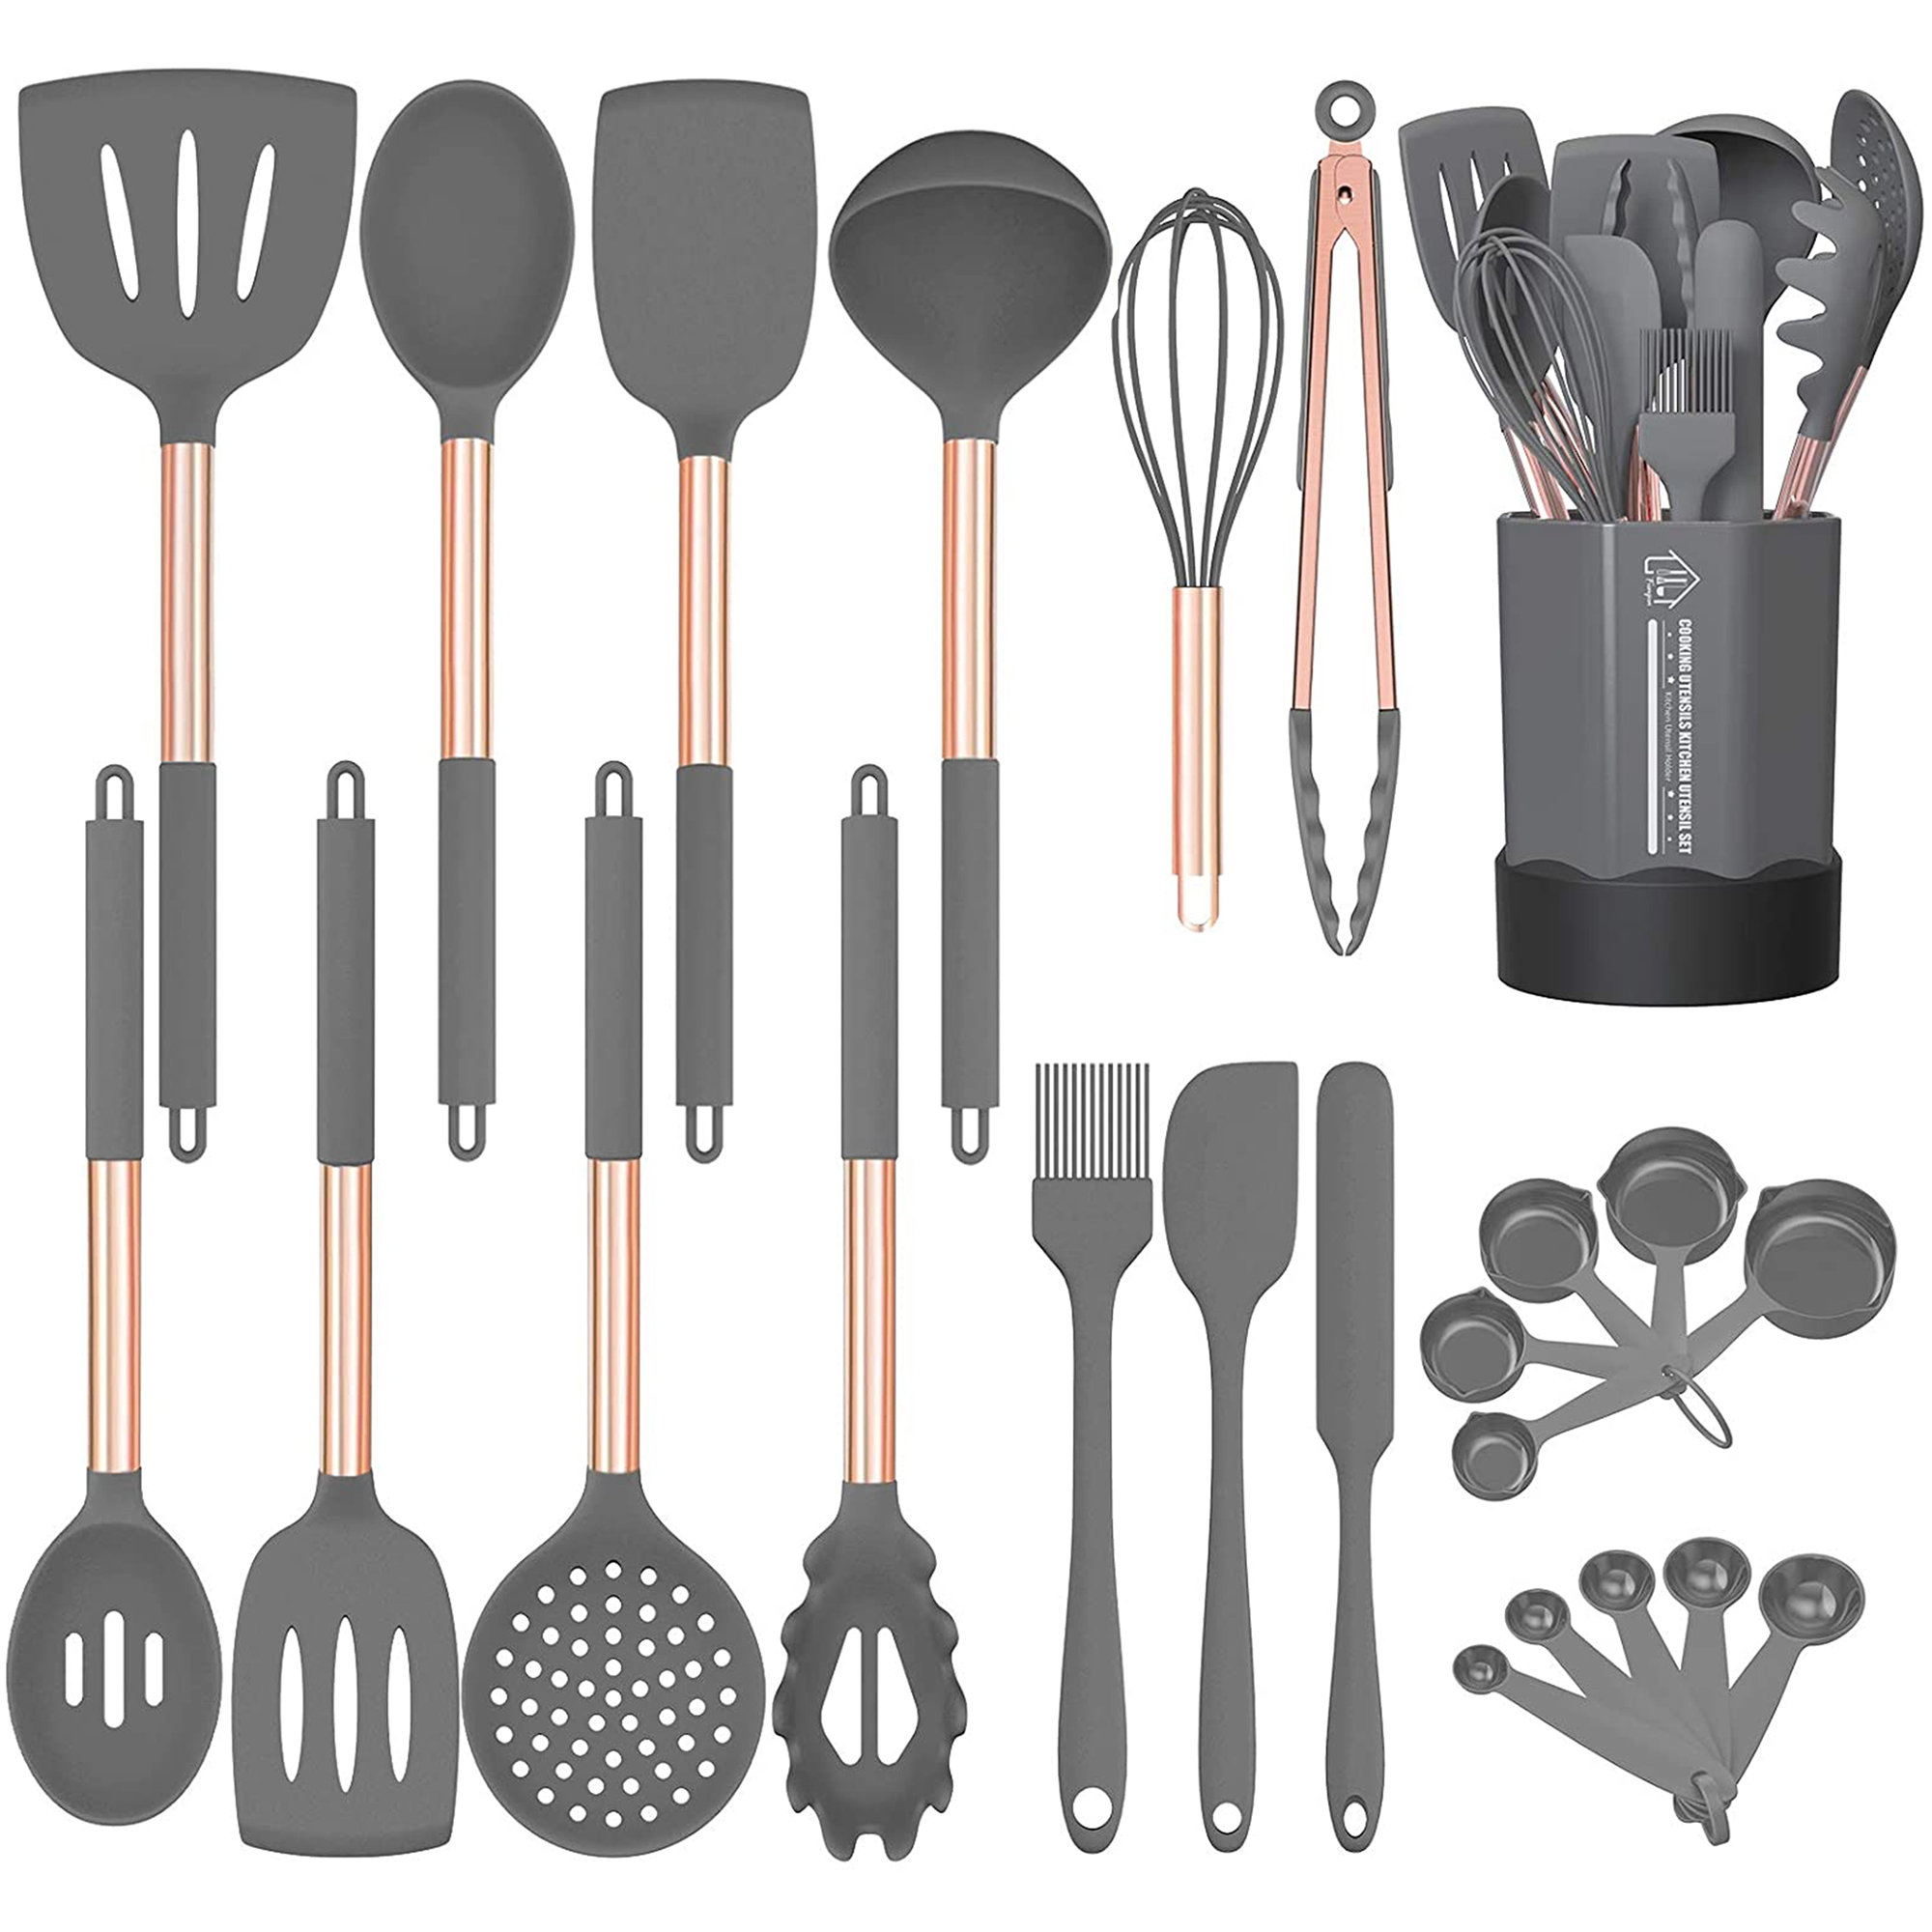 10 Pcs. Silicone Heat Resistant Kitchen Cooking Utensils Set - Non-Stick  Baking Tools with PP Holder (Silver and Black)